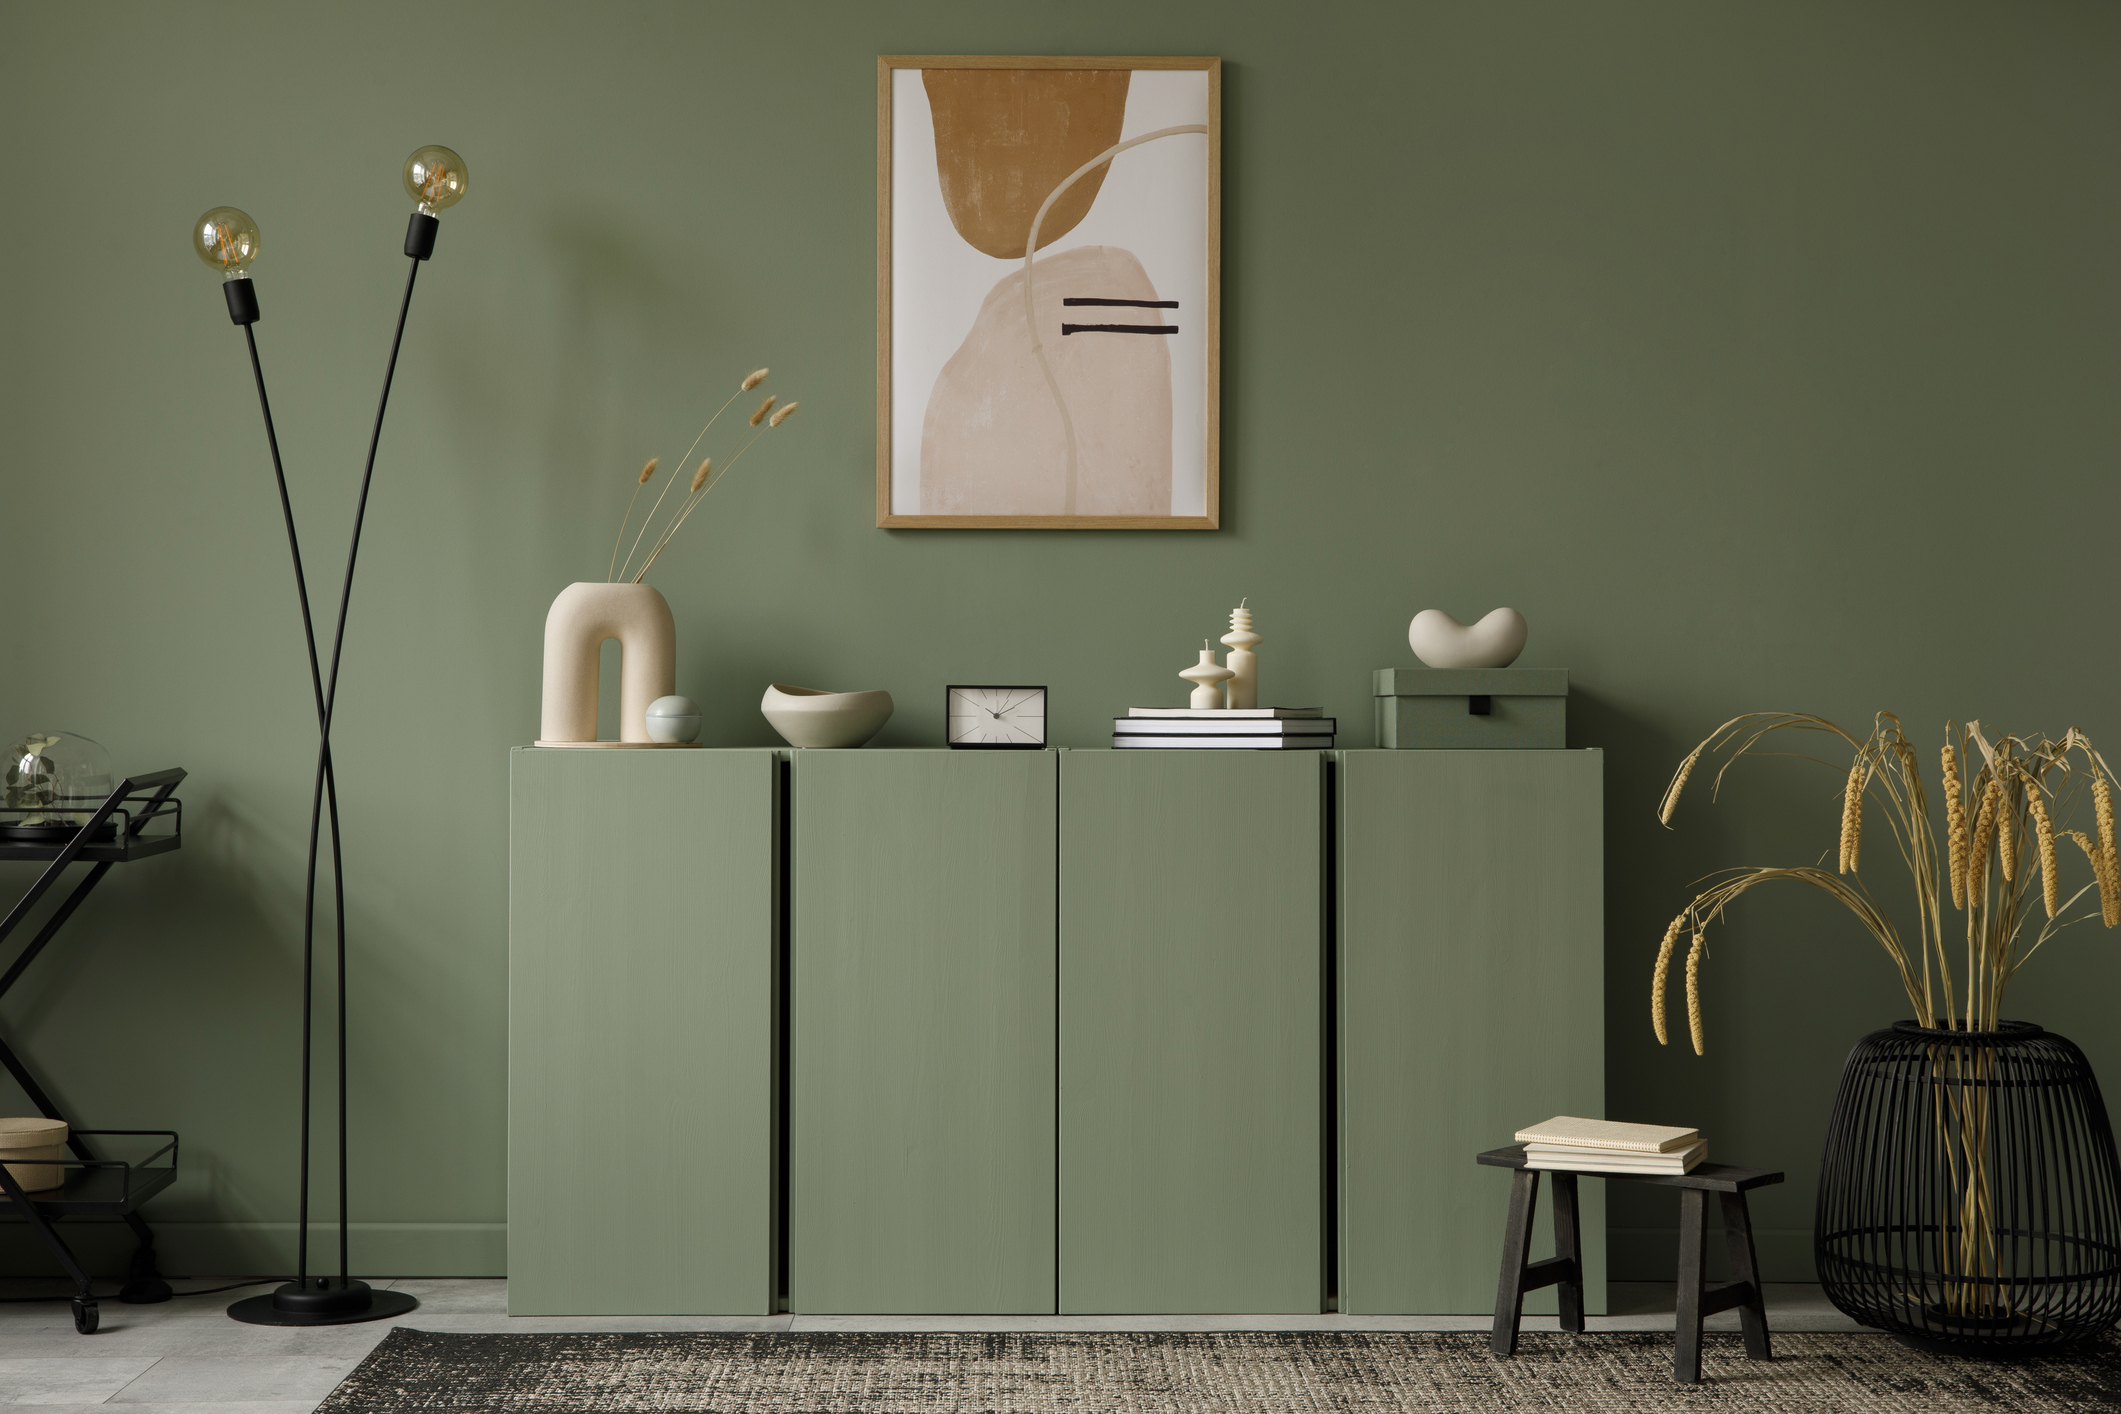 painted green room with beige and black accessories